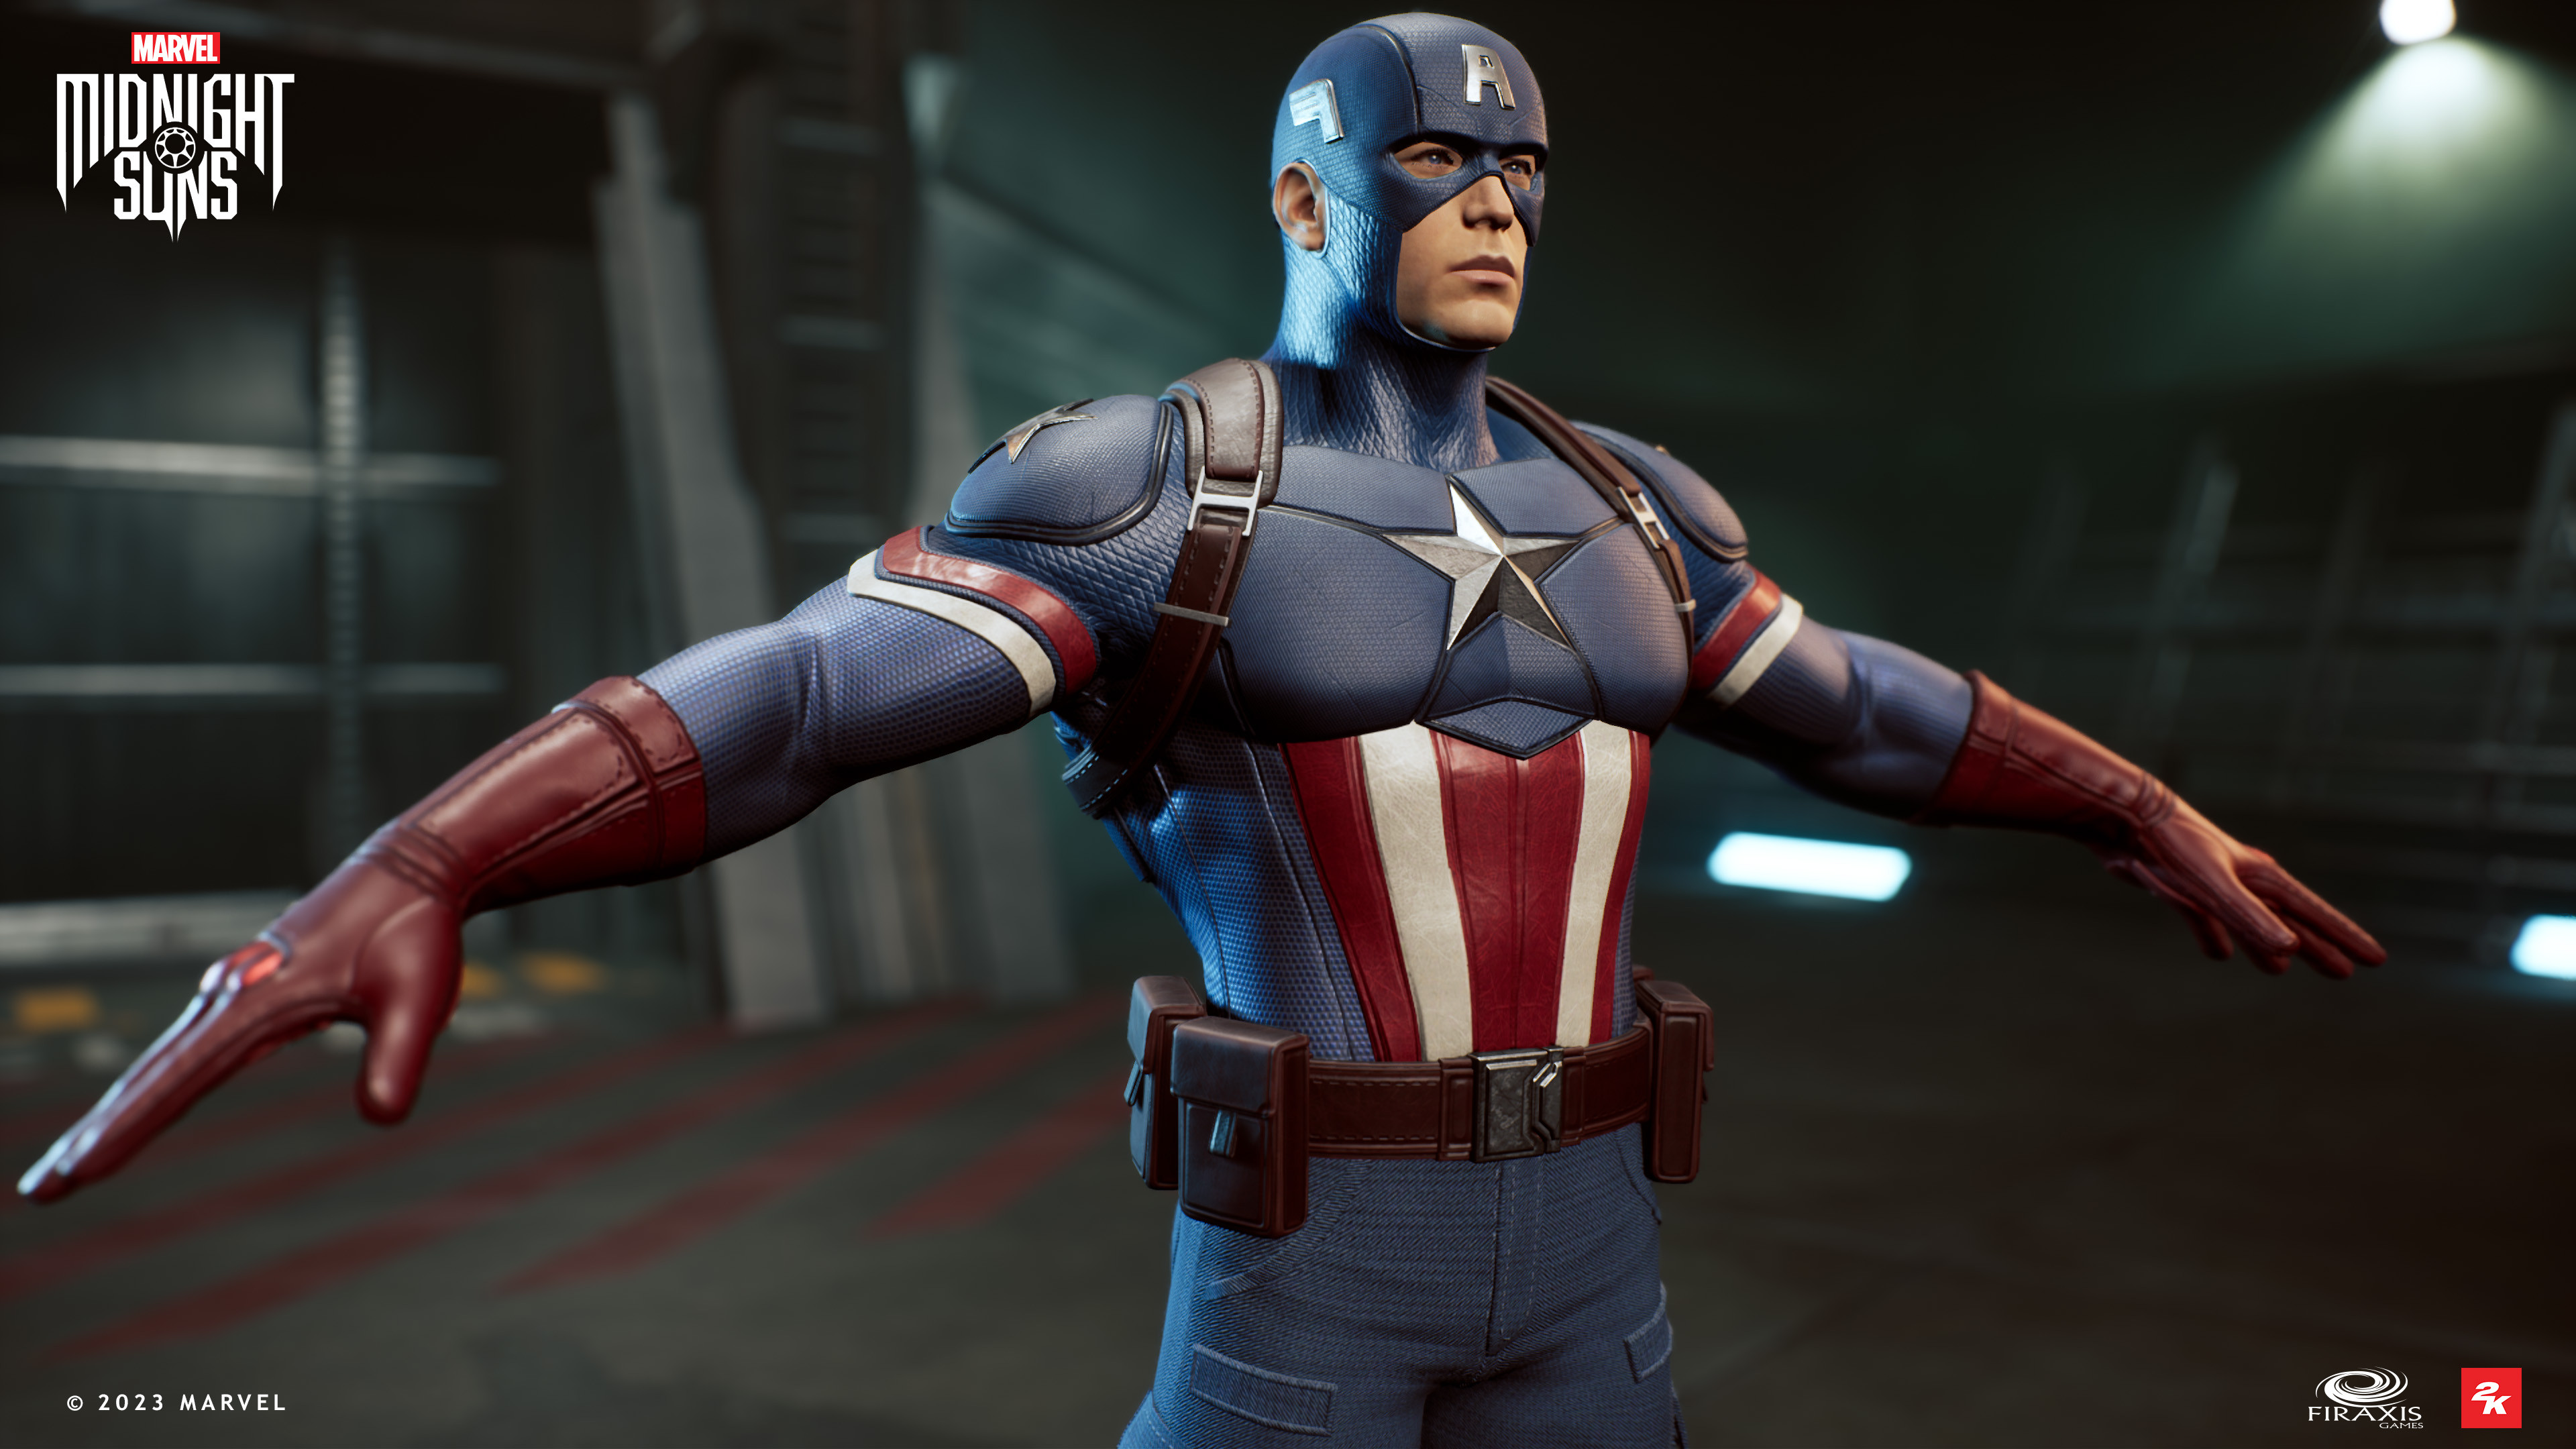 Captain America's Midnight Suns Skillset Unveiled in Character